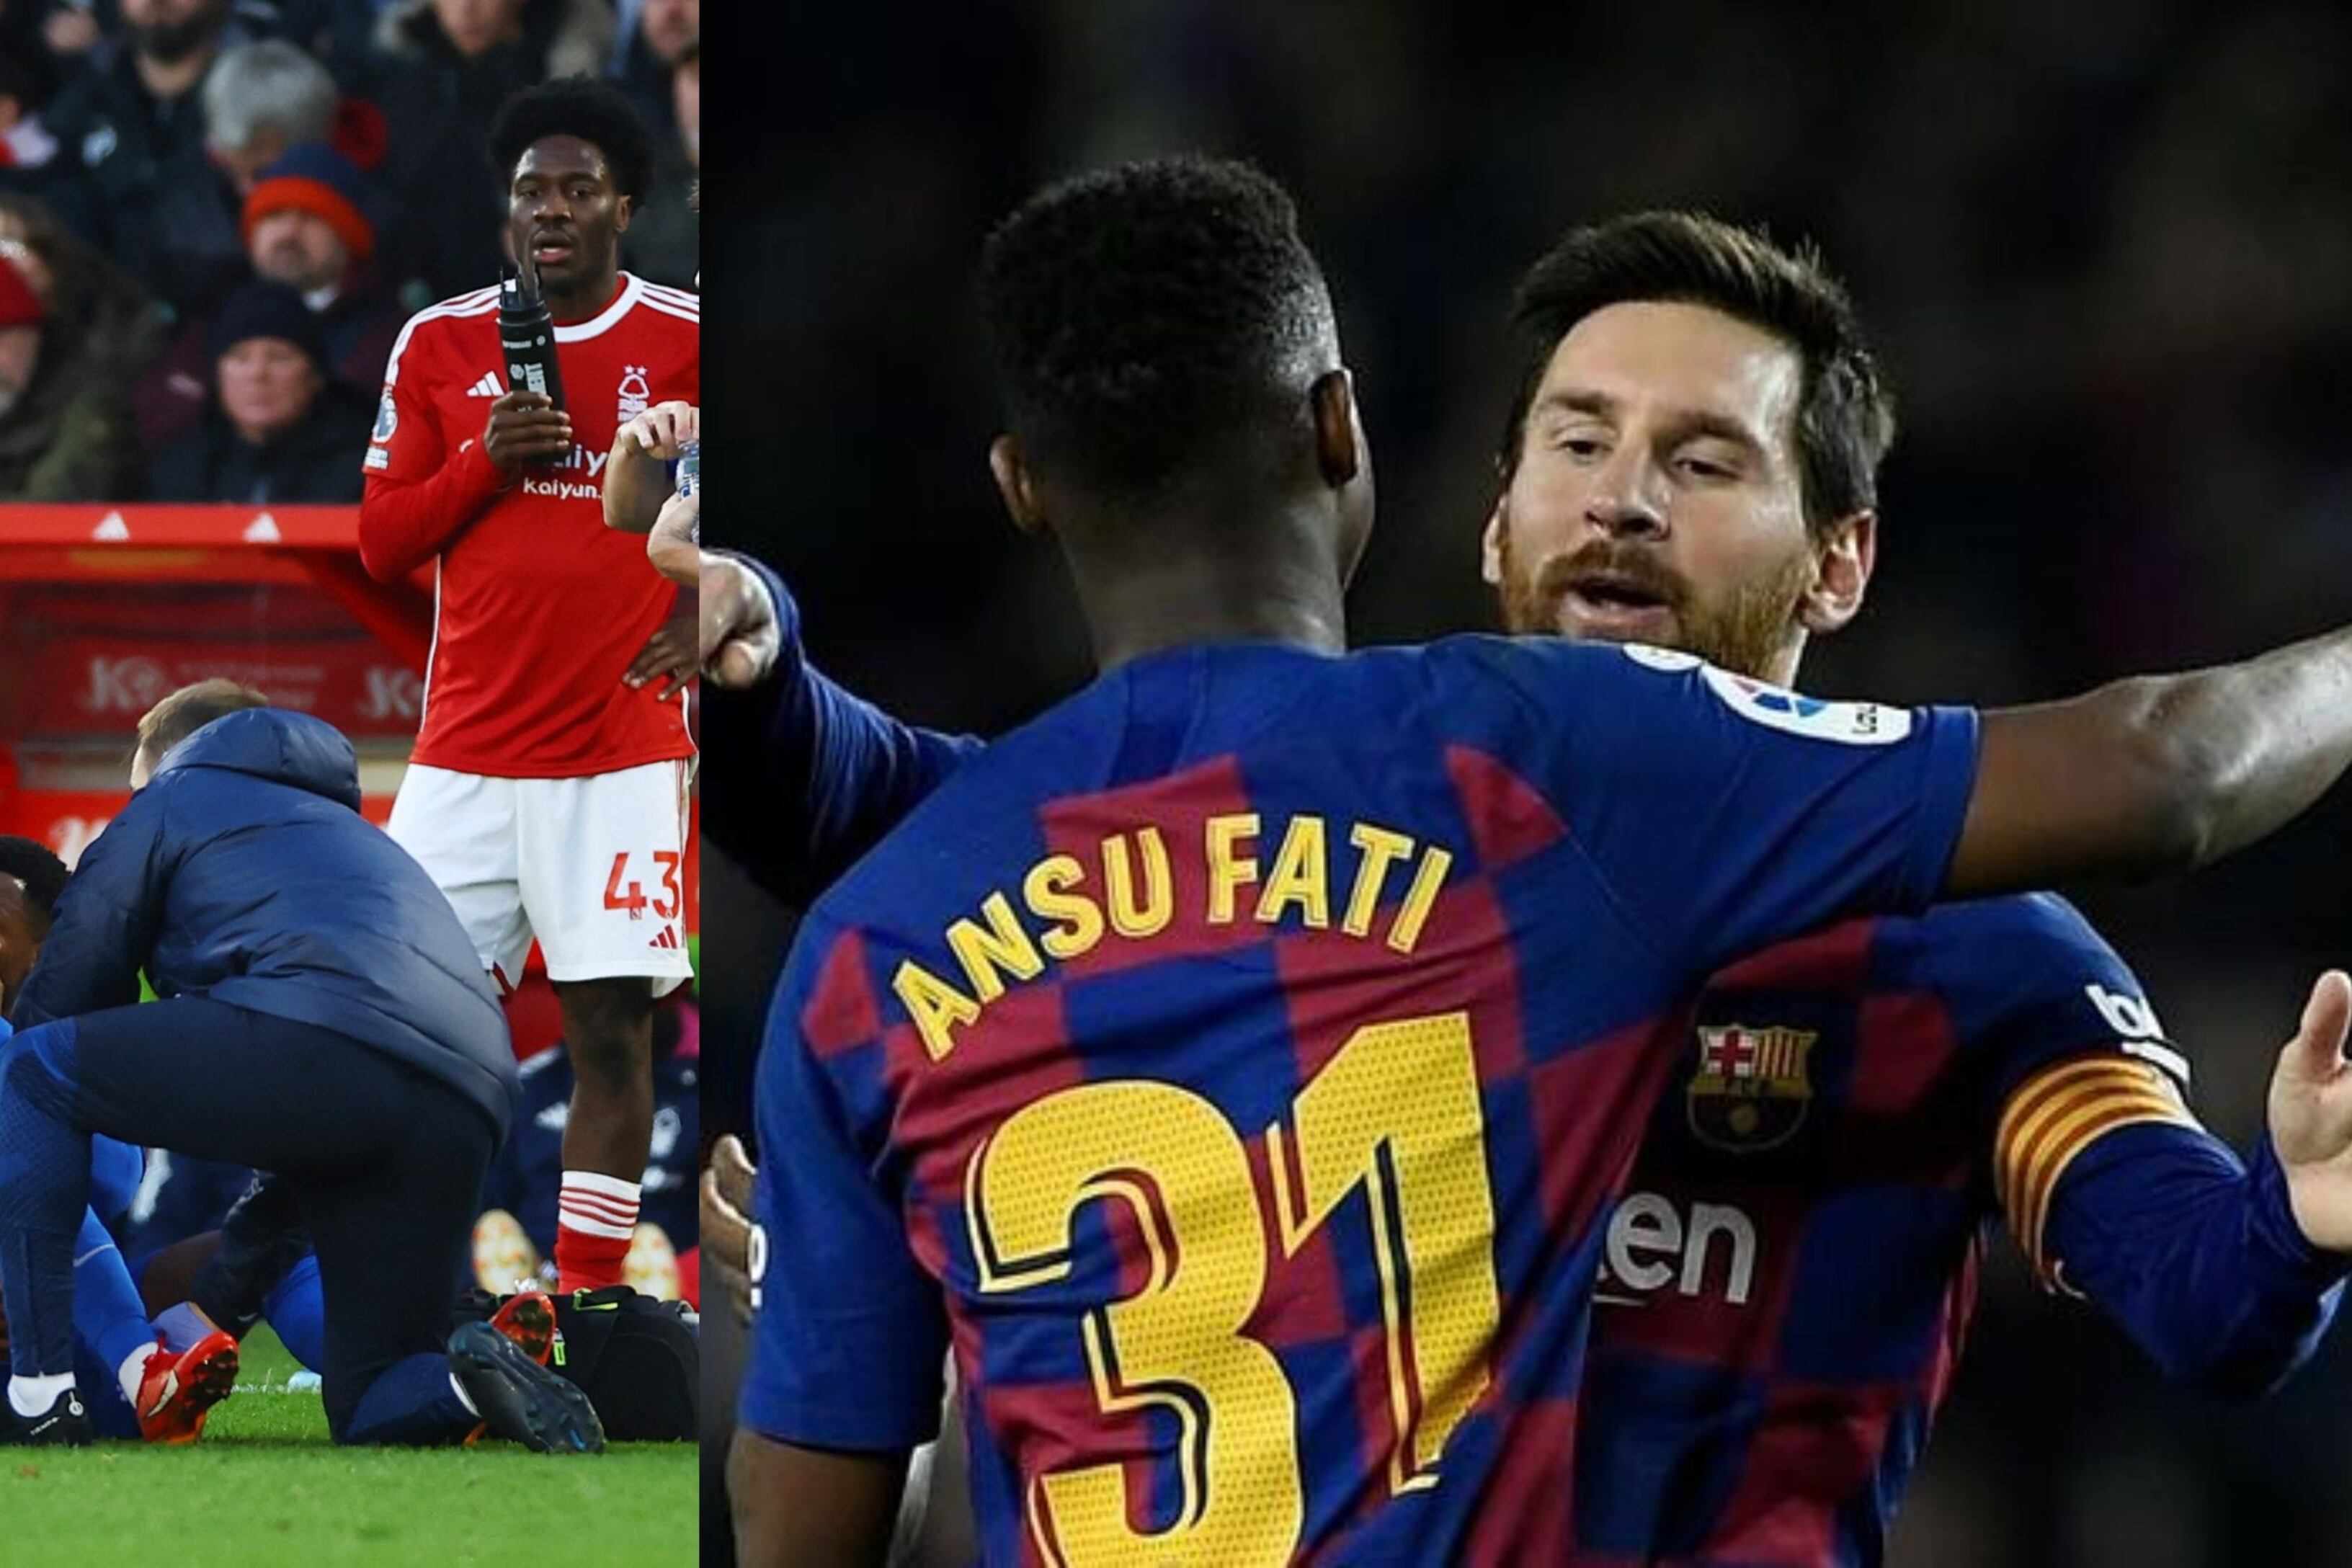 He was Messi's heir and cost 80 million, Ansu Fati's new value after his injury in the Premier League